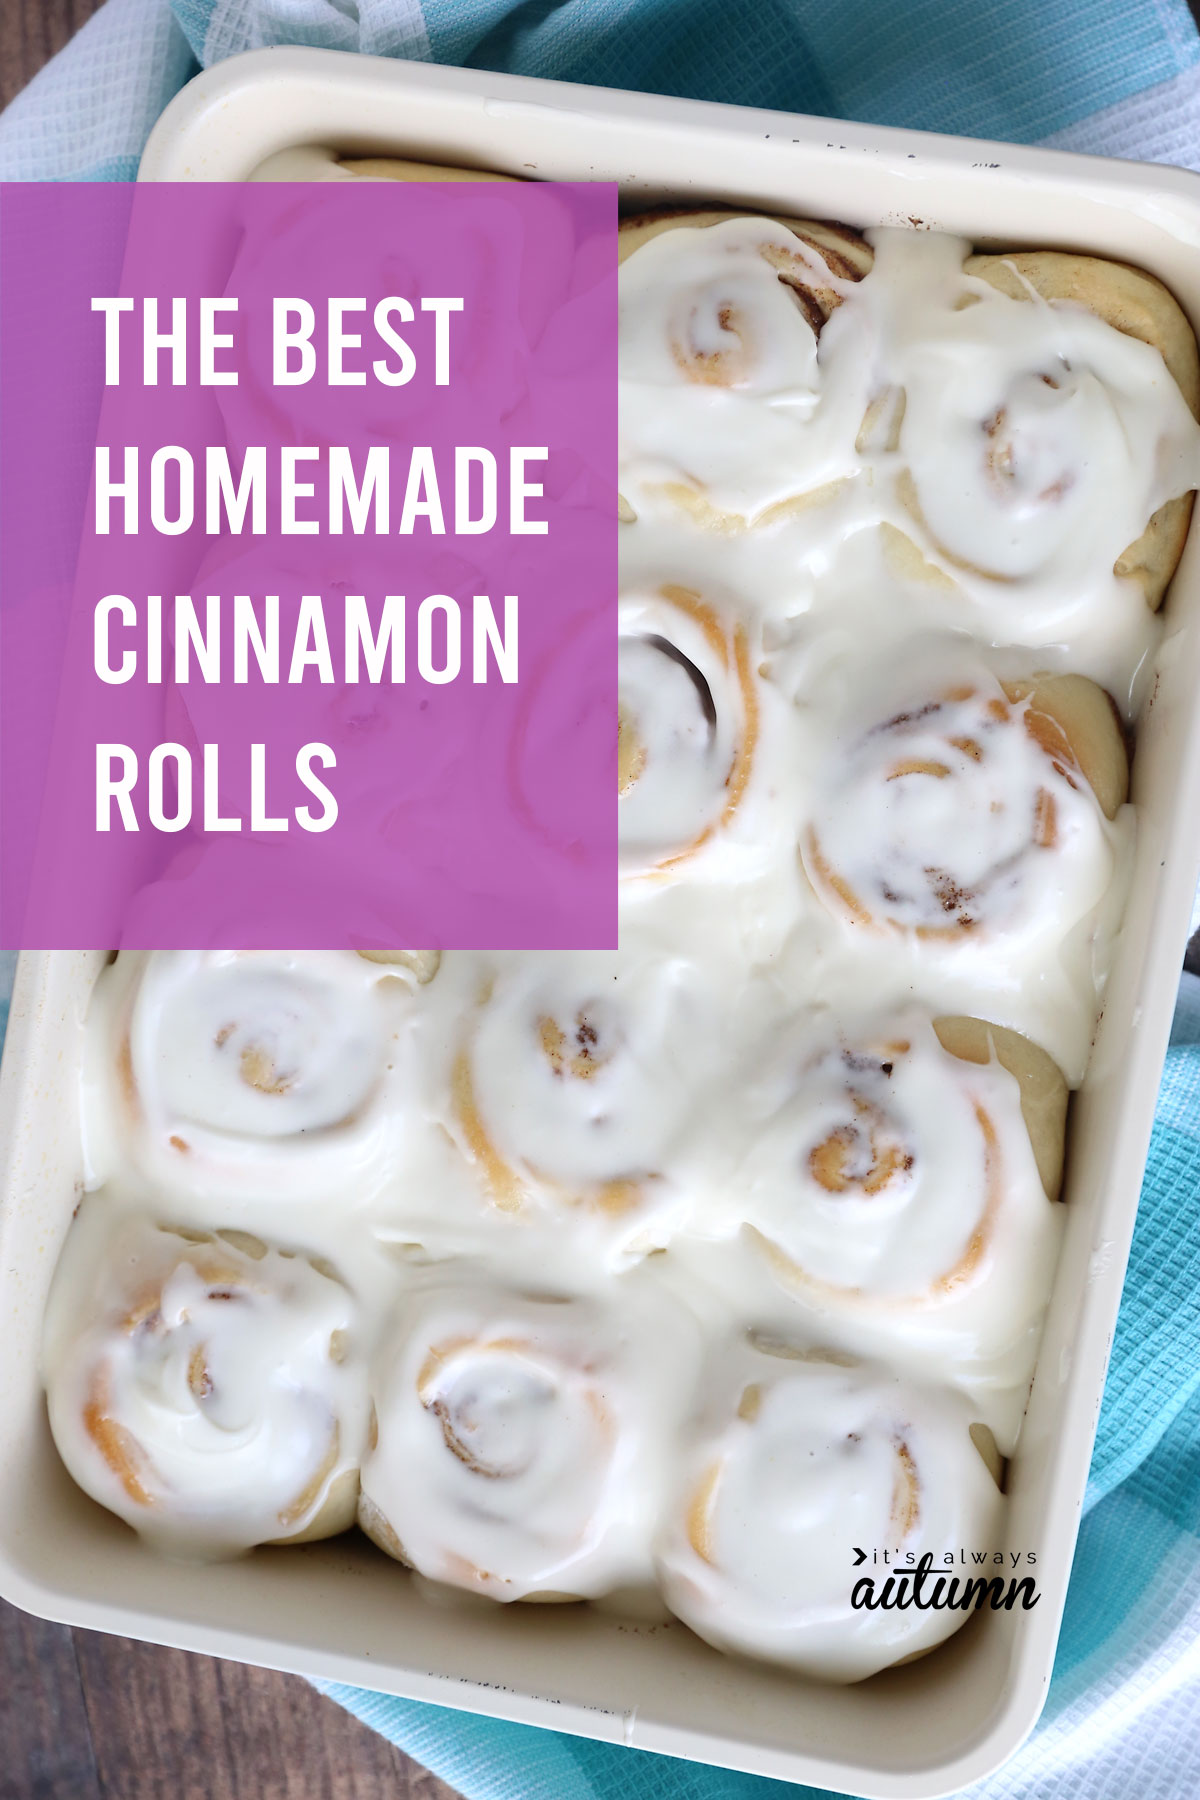 This is the best cinnamon roll recipe! The dough is easy to make and handle, the filling is gooey, and the frosting is to die for!